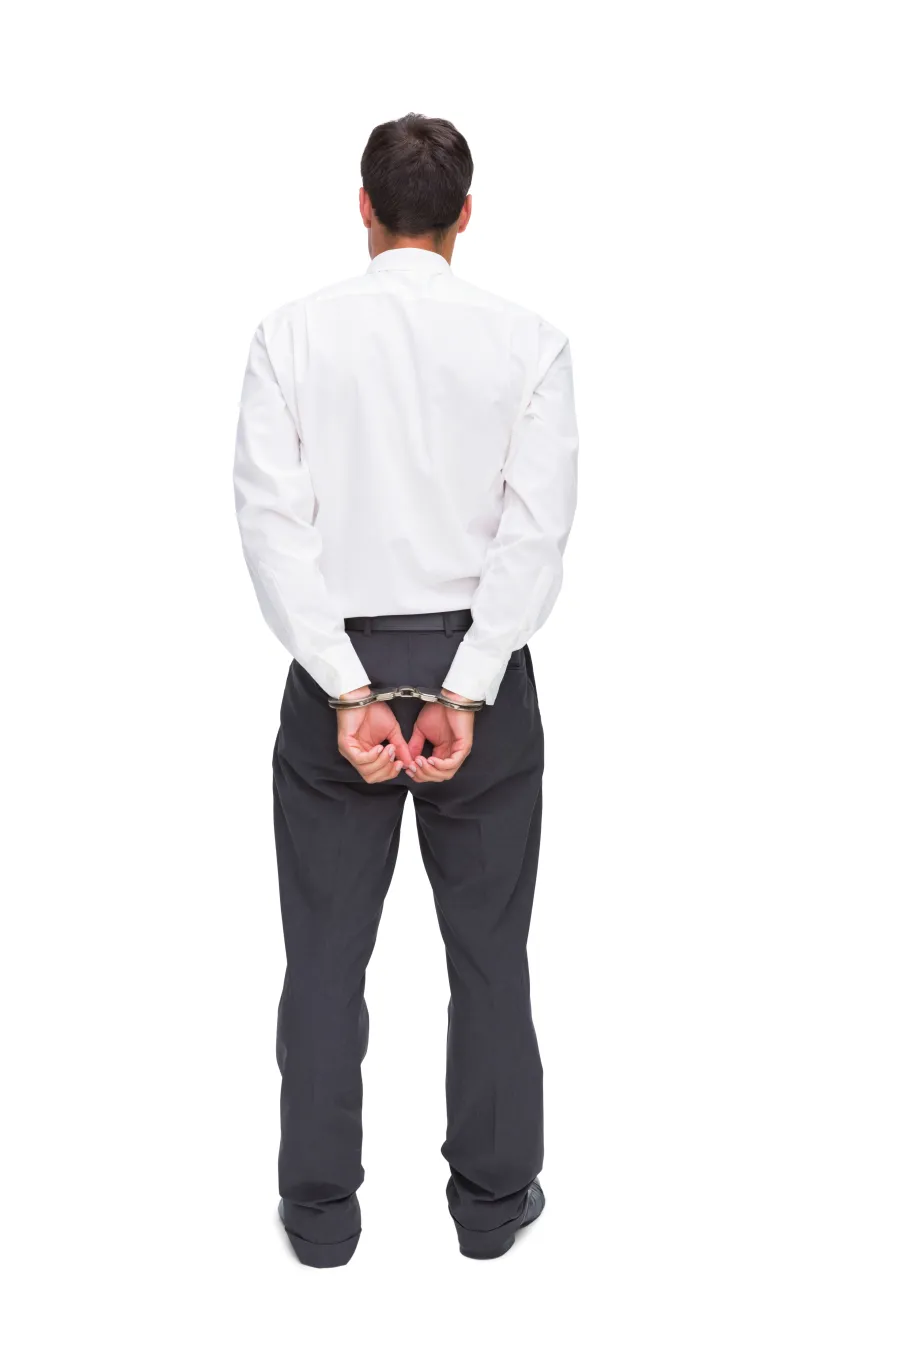 a person wearing a white shirt and black pants with handcuffs on